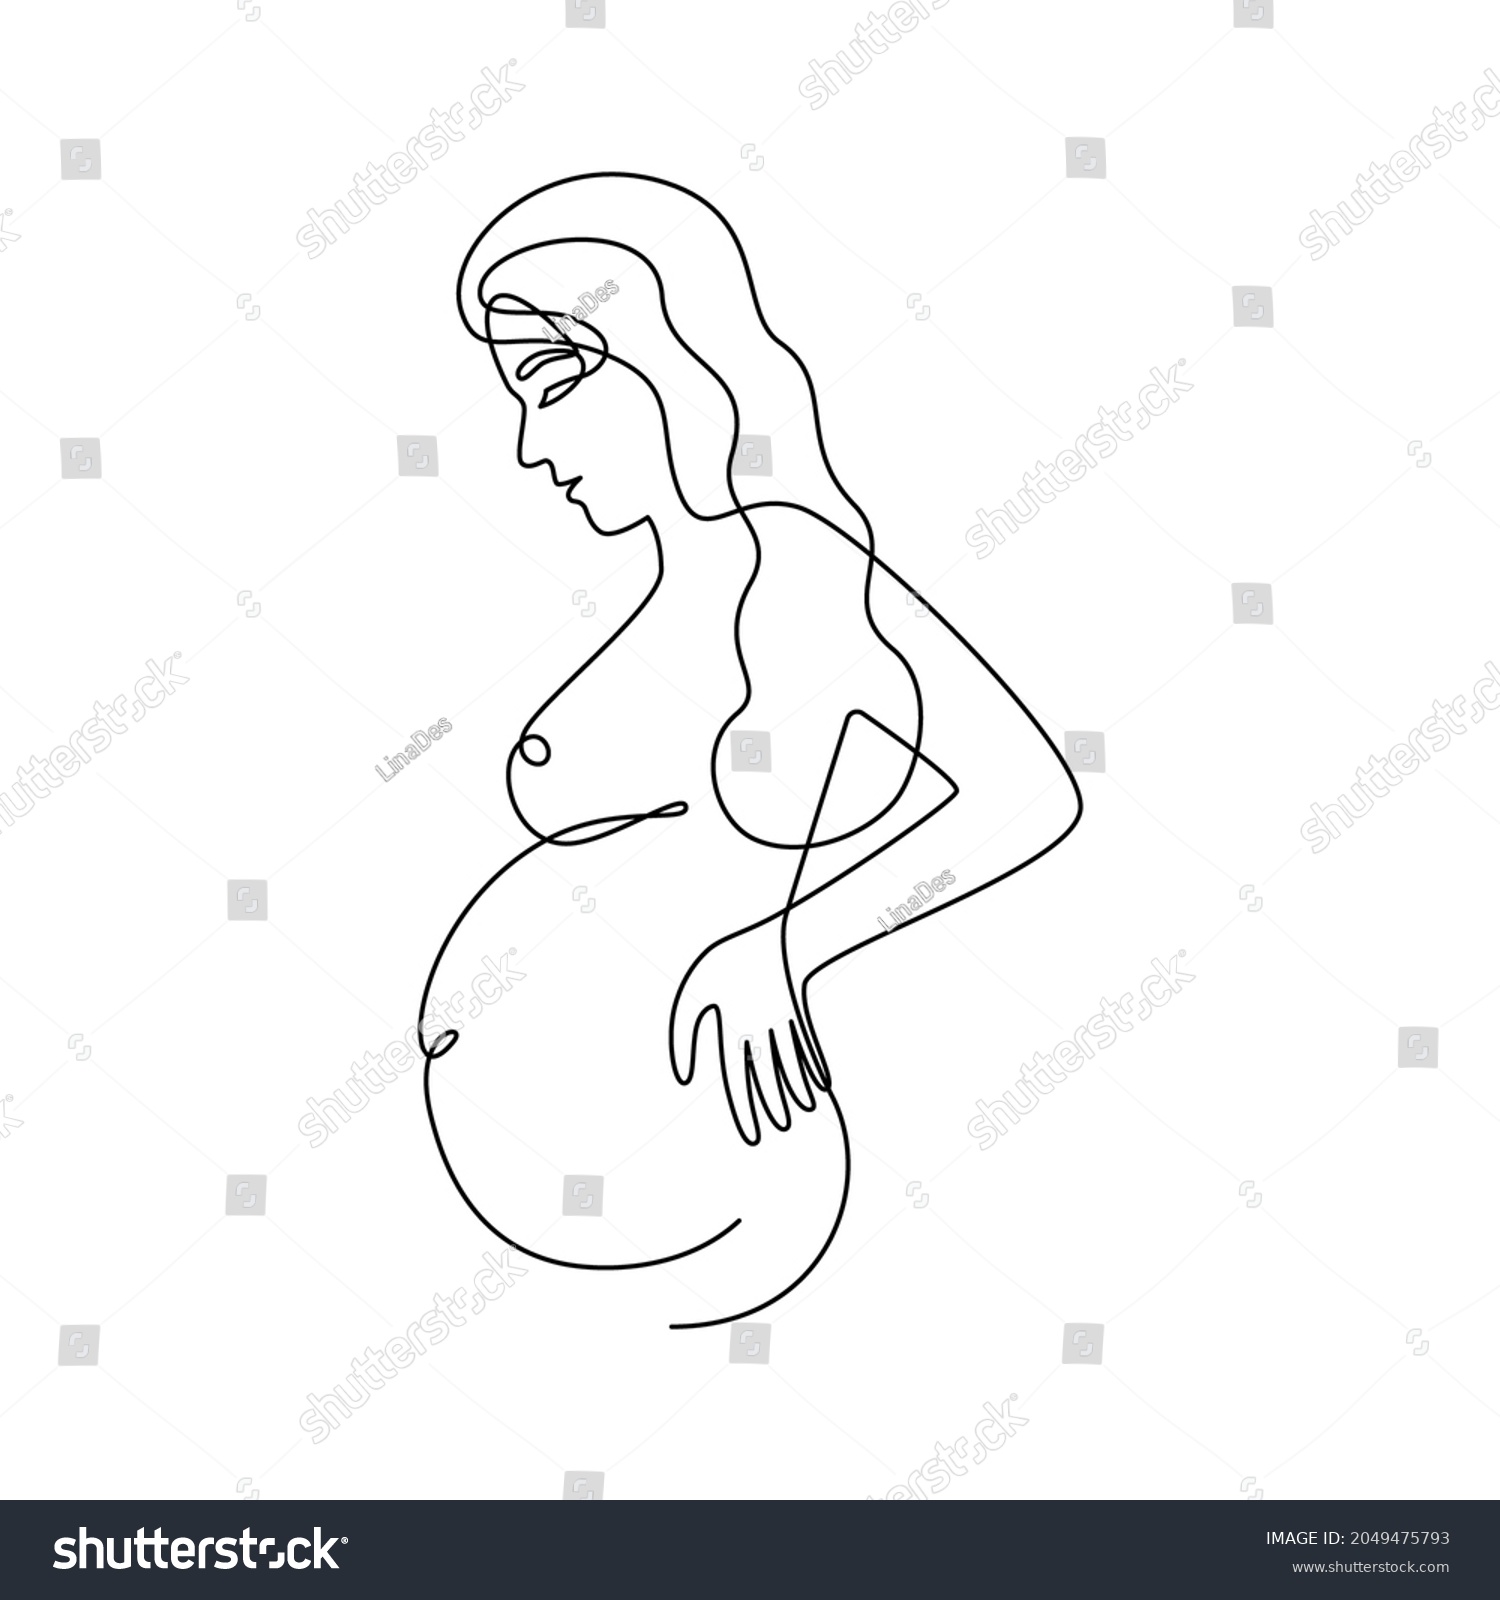 Linear Abstract Woman Pregnant Happy Pregnant Stock Vector Royalty Free Shutterstock